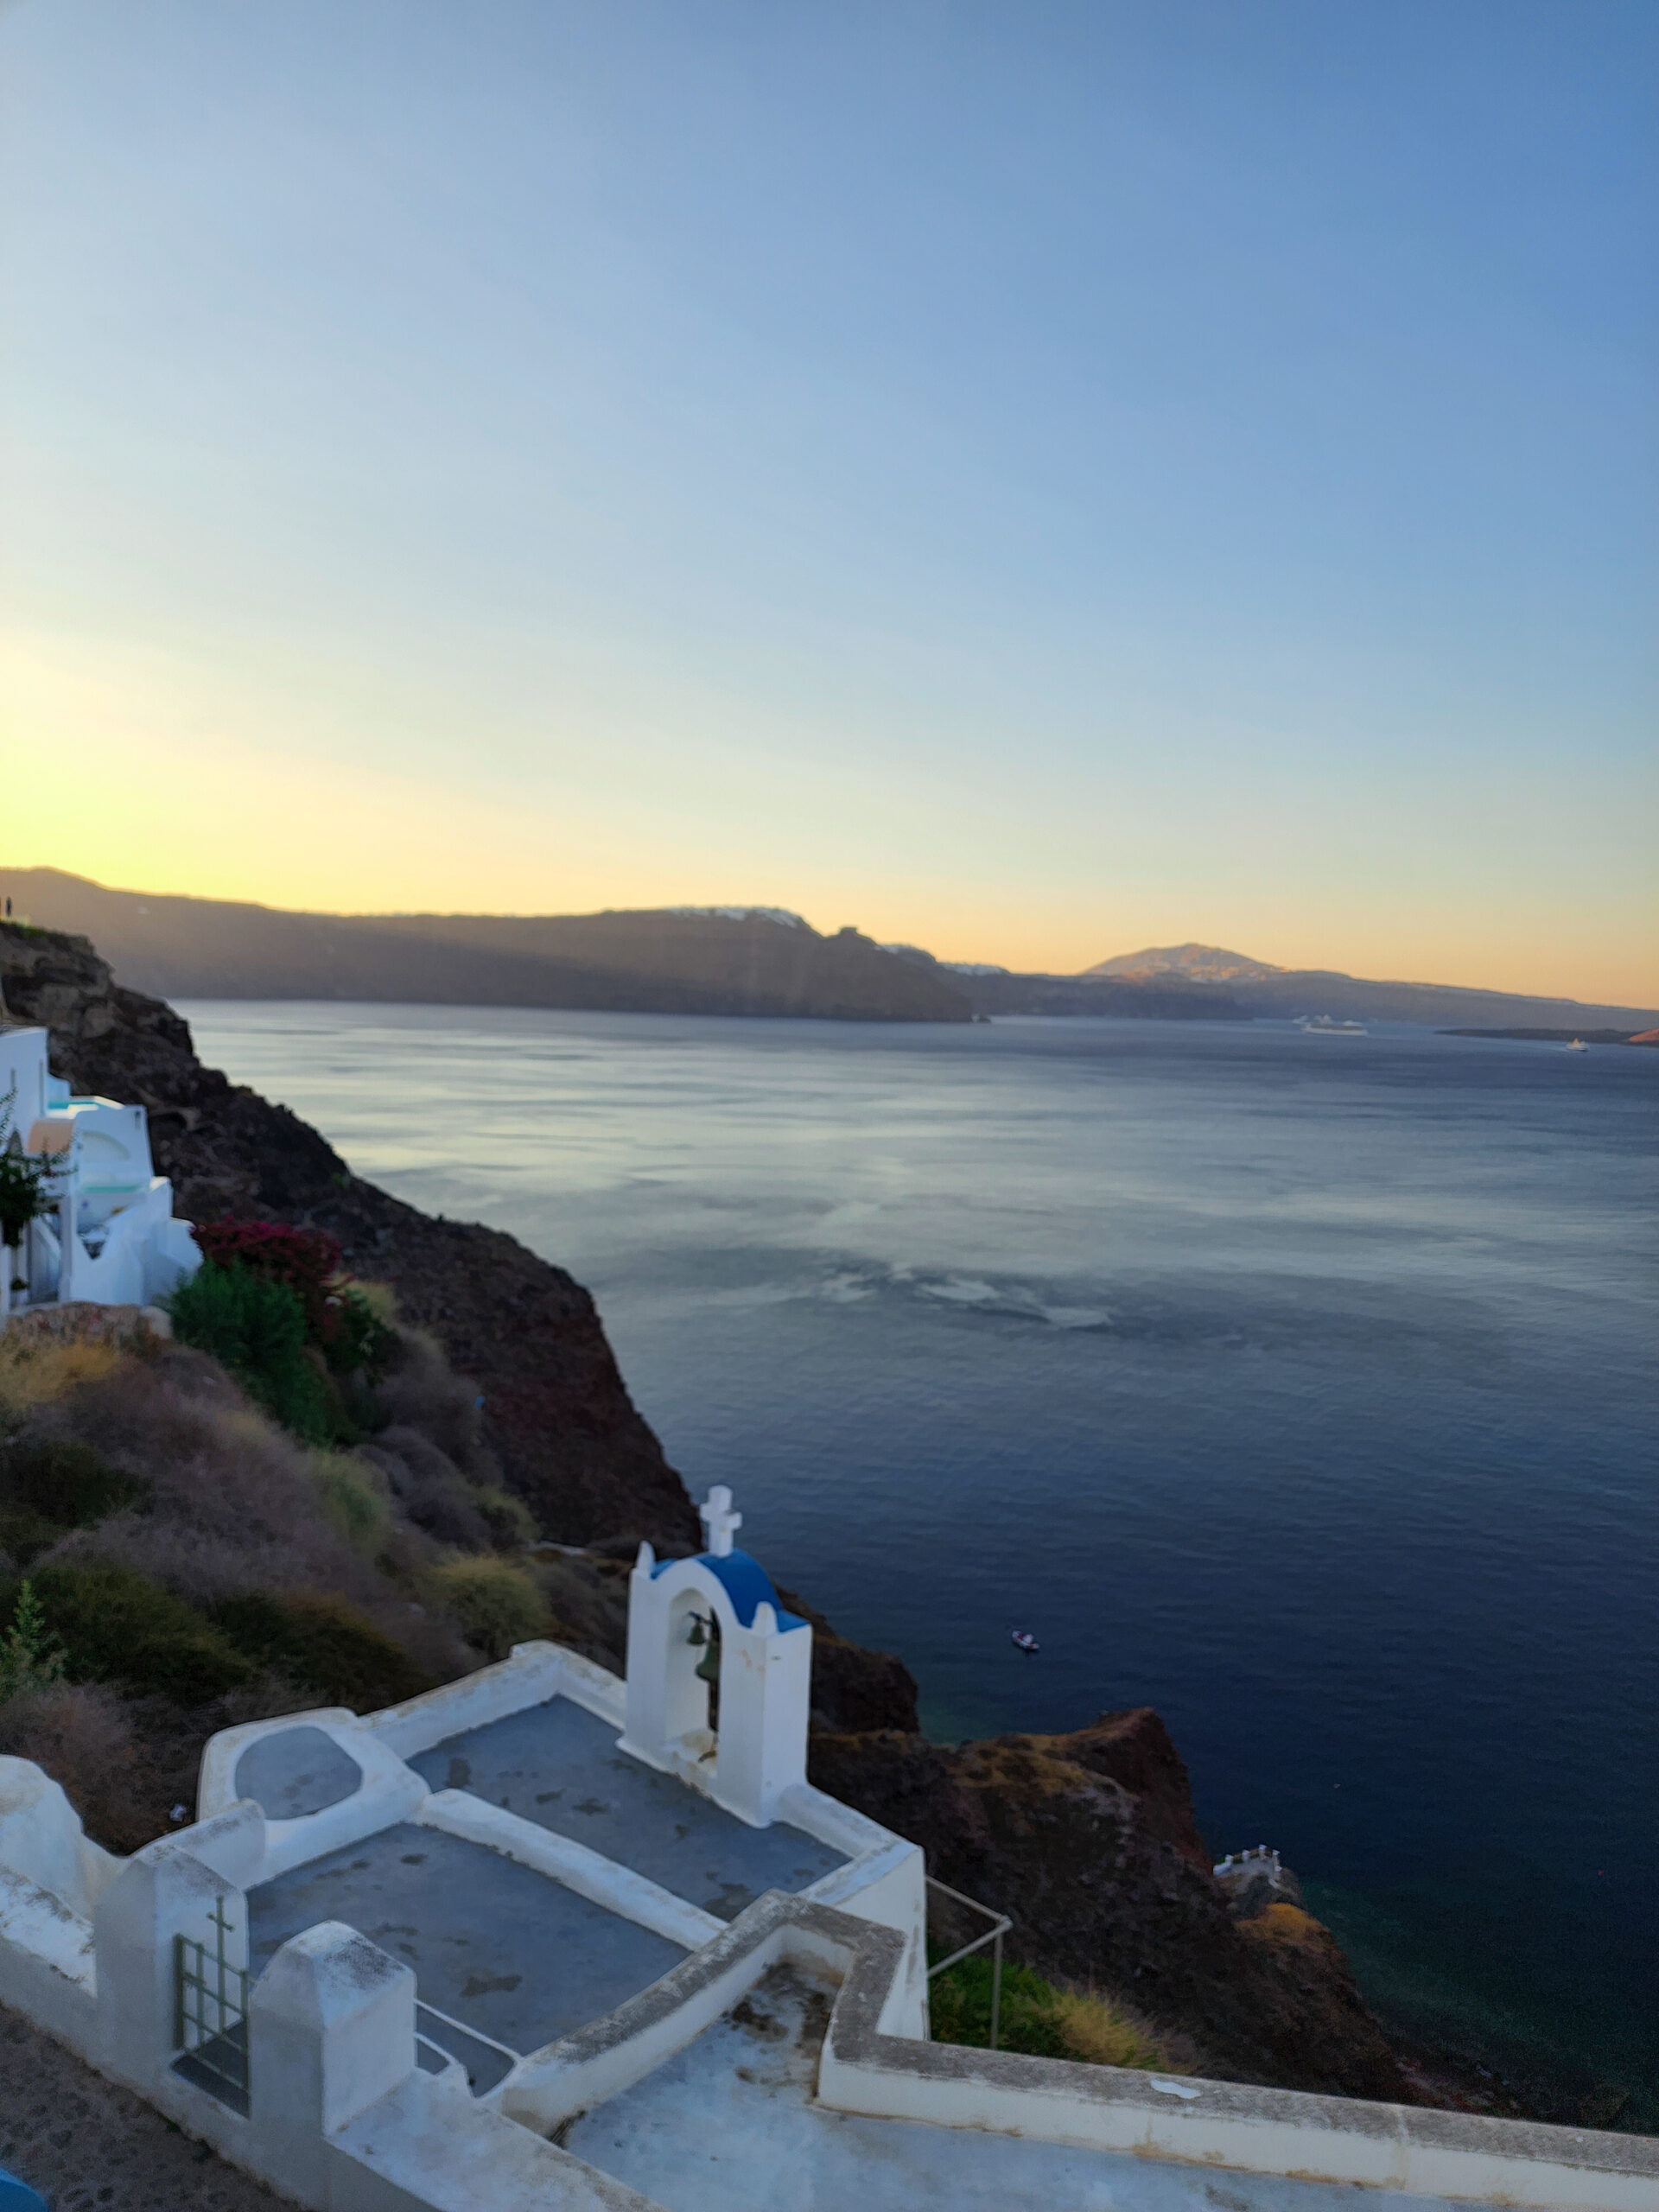 Santorini get up early beat crowds